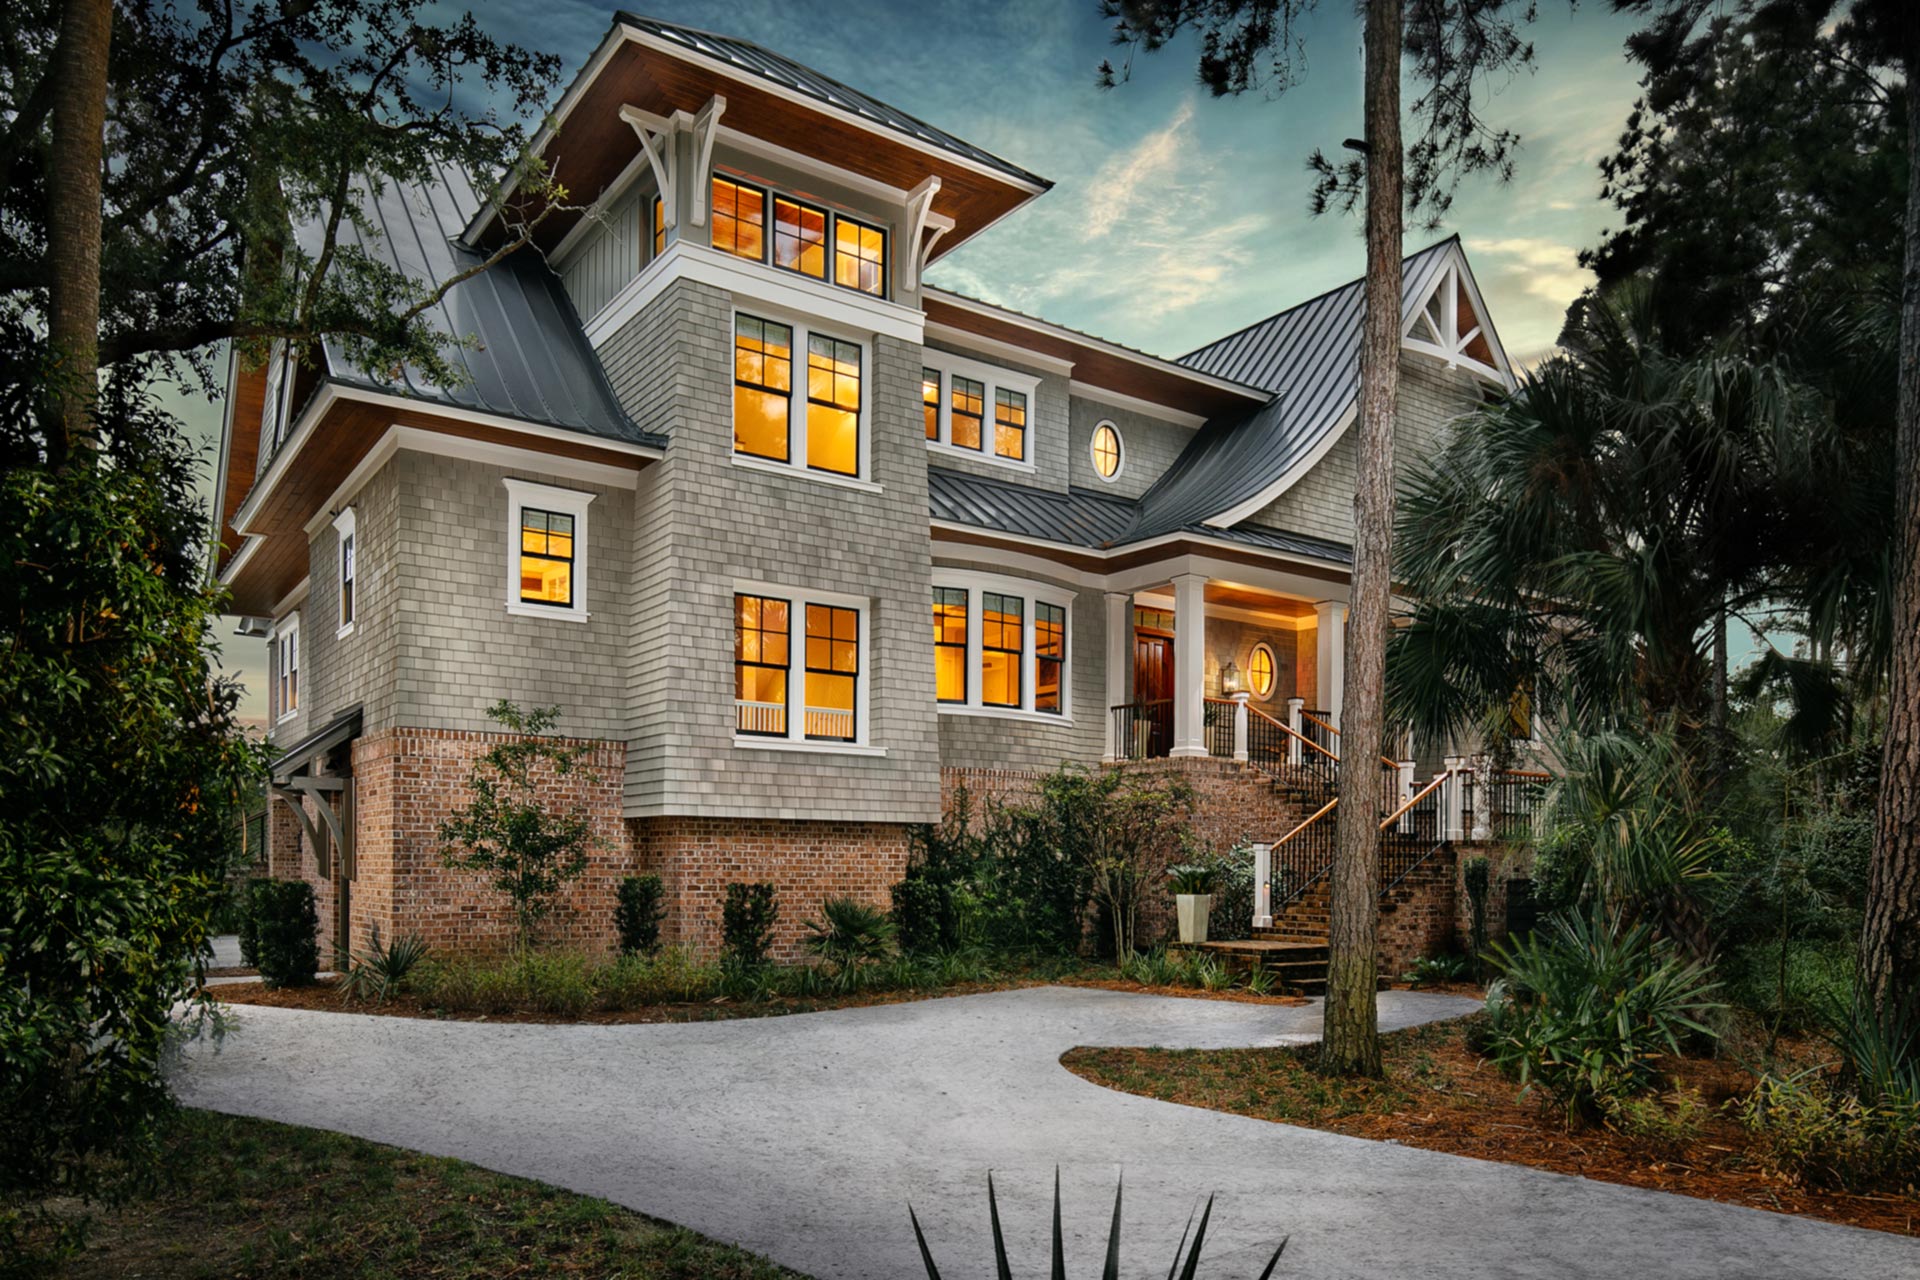 Spivey Architects employs the best residential architects in Charleston. Let them design your luxury home today.